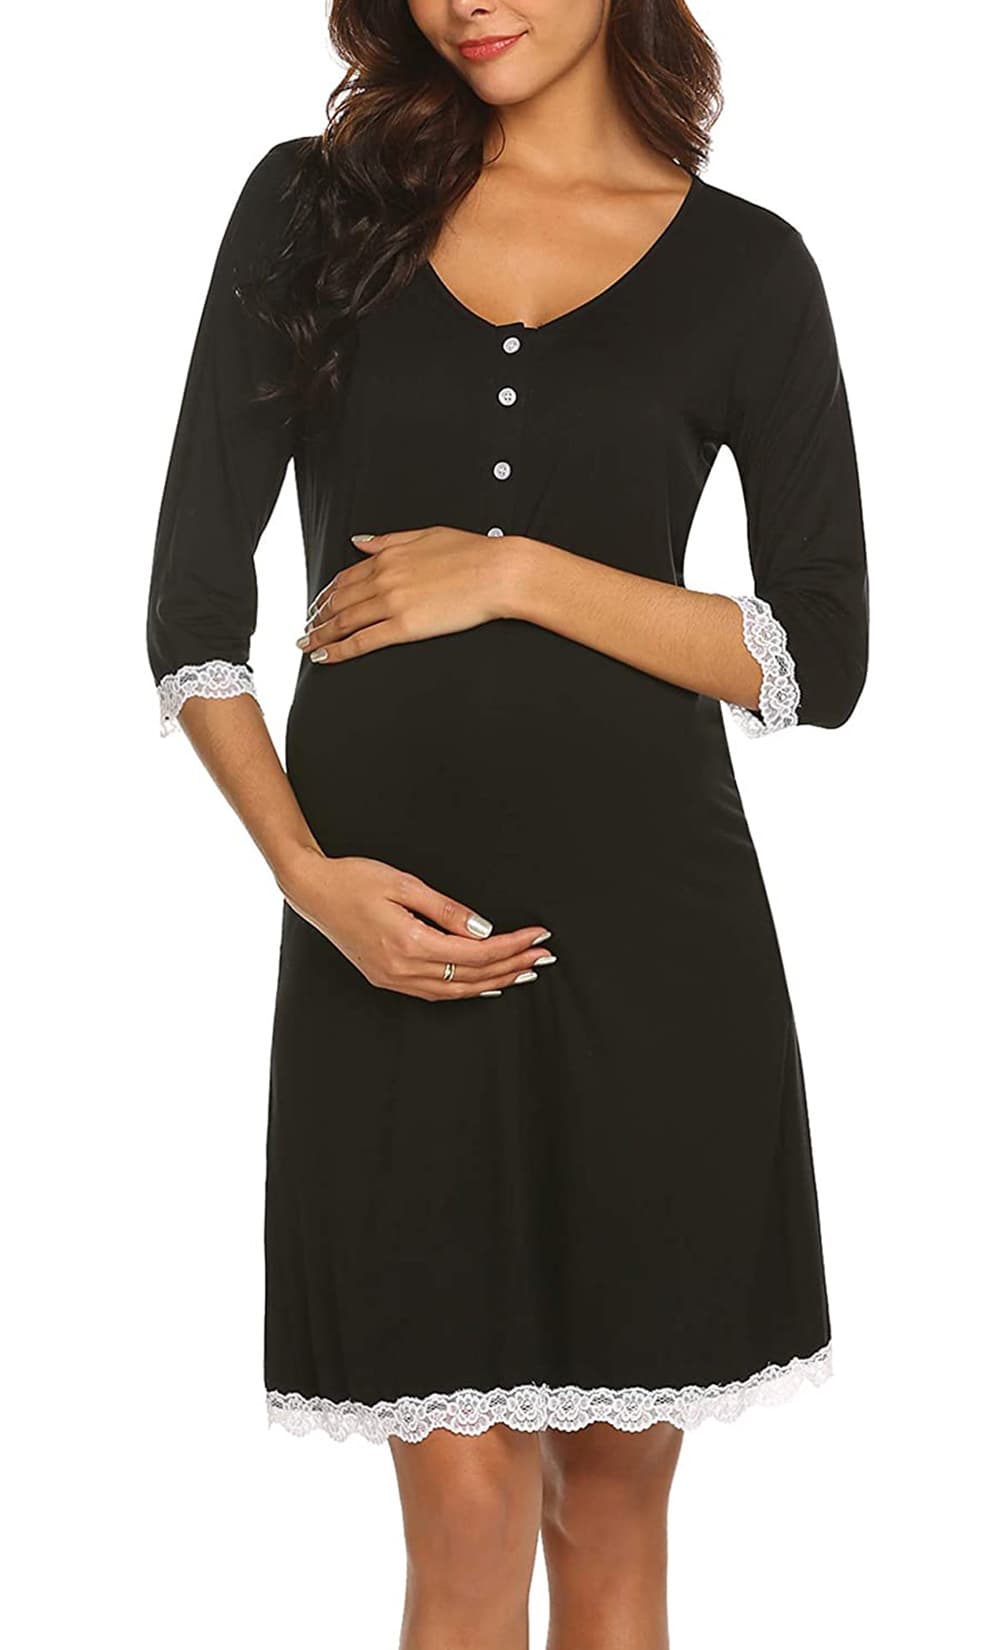 Front Button-up Maternity Dress